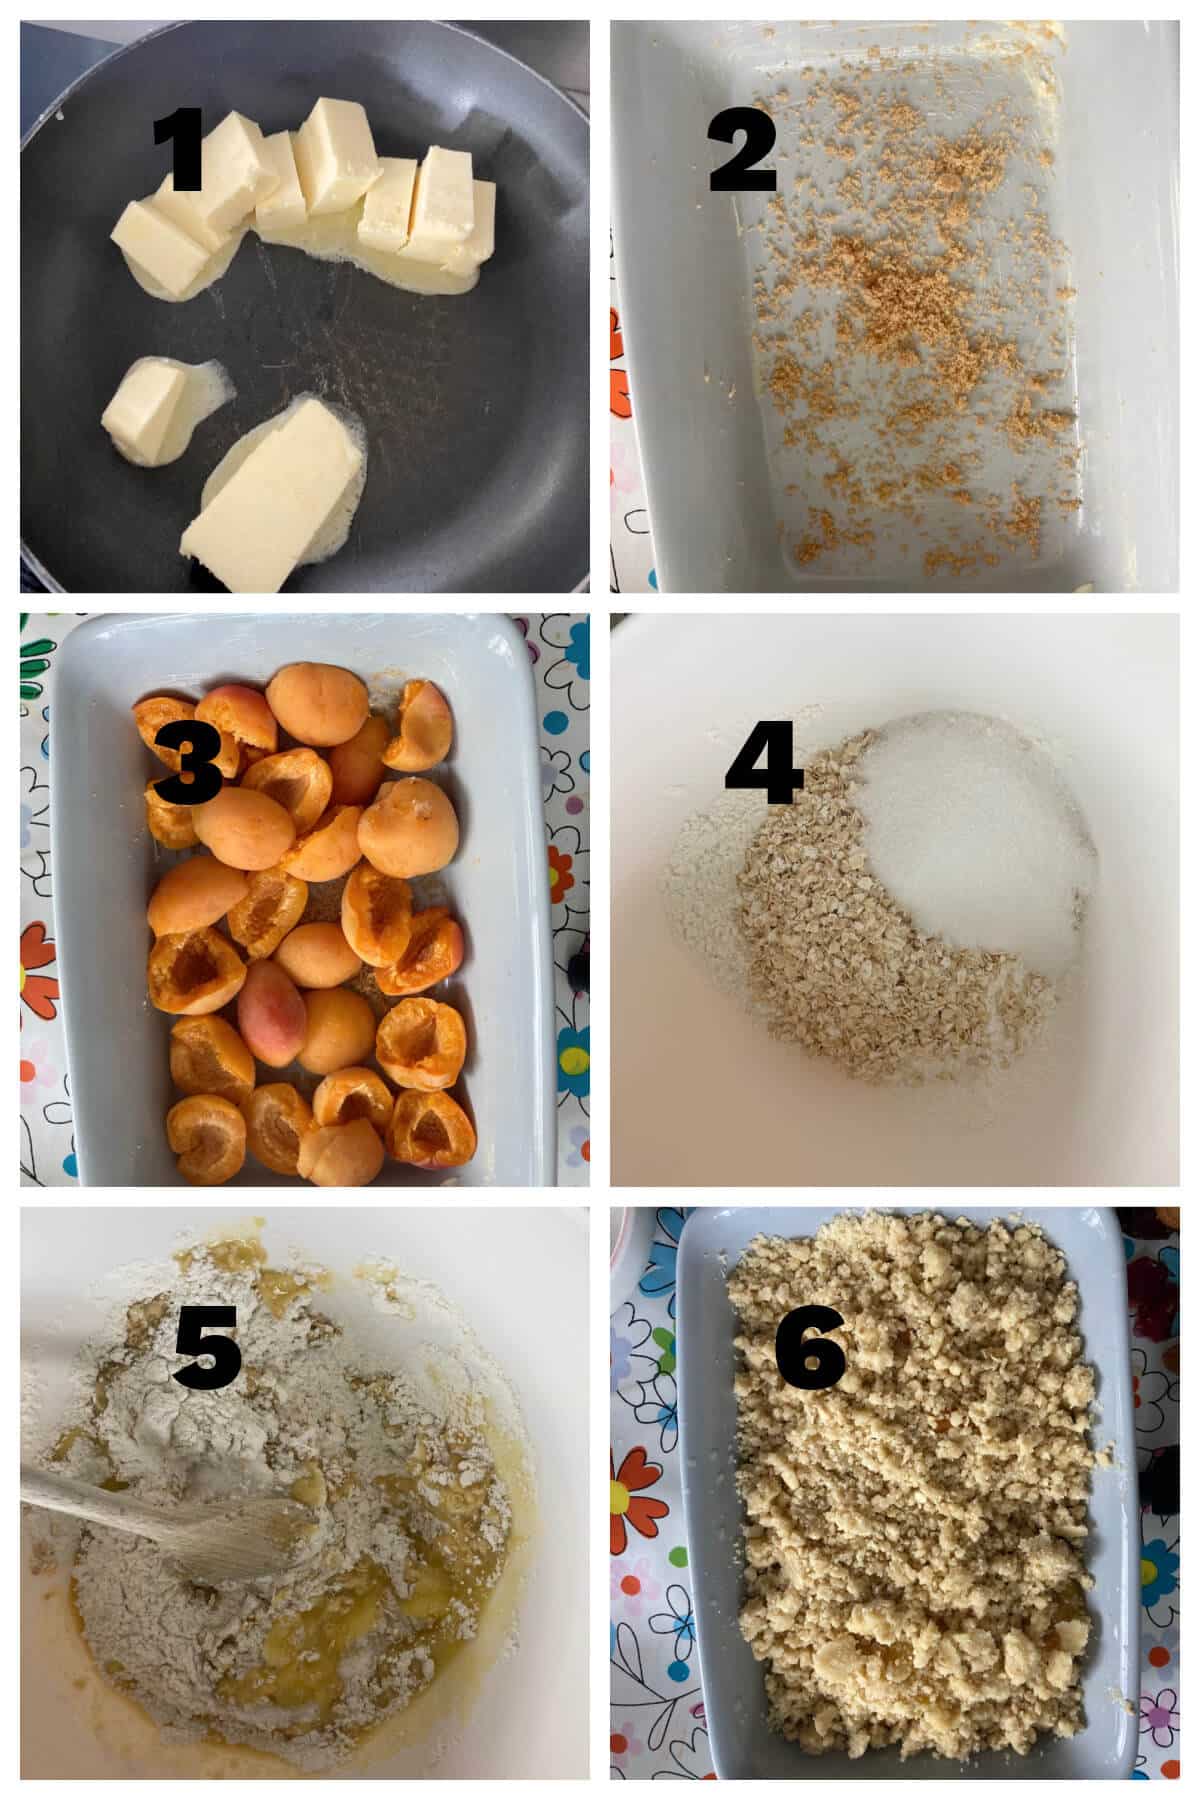 Collage of 6 photos to show how to make apricot crumble.